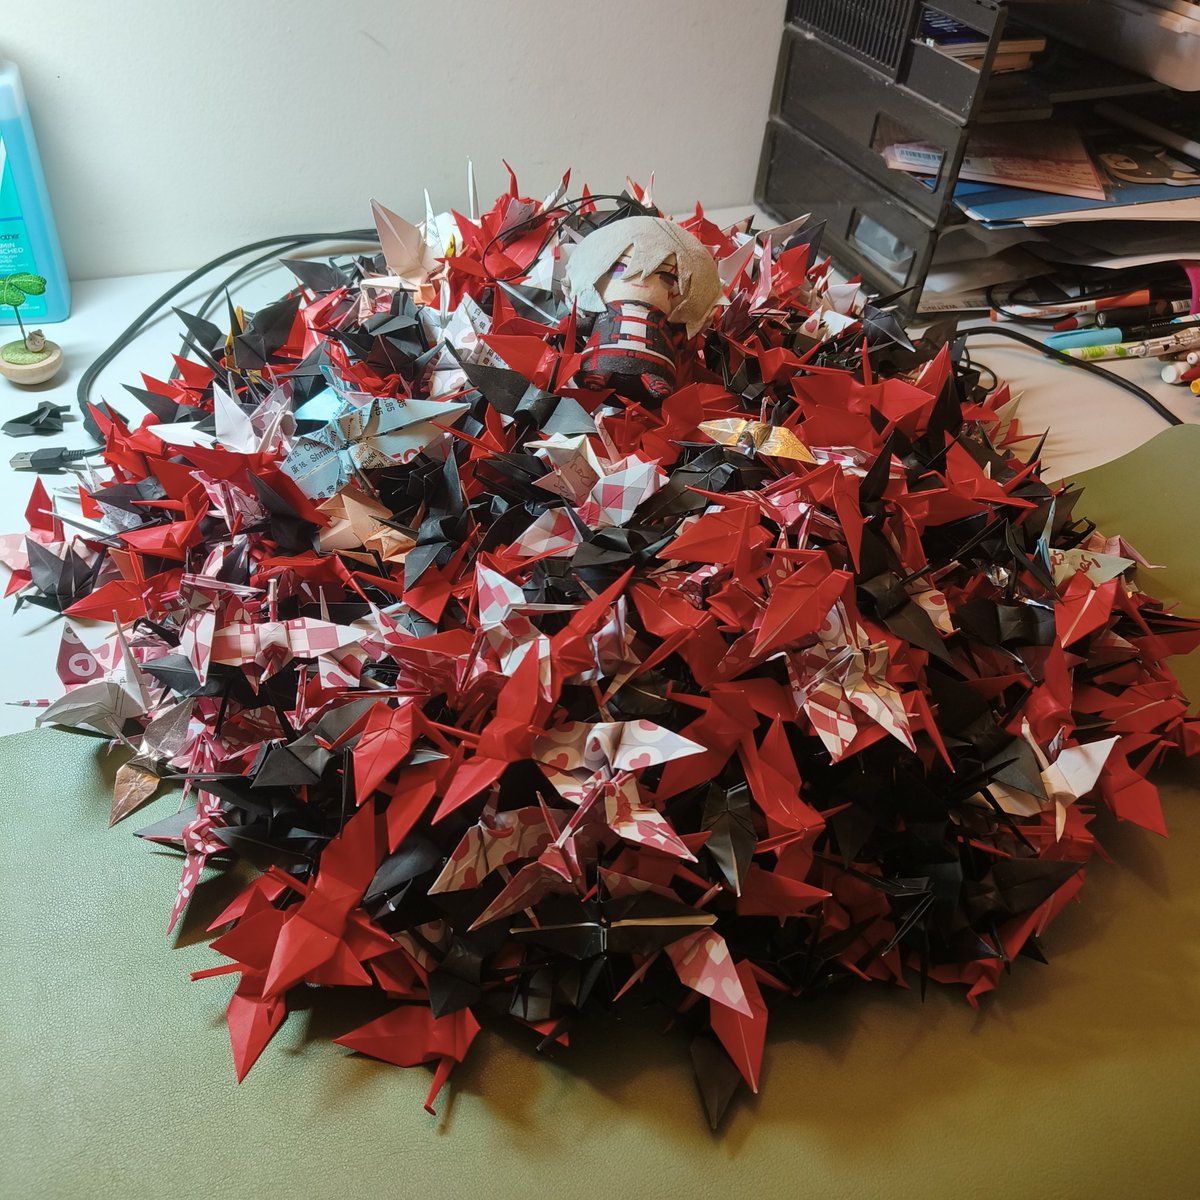 1000 cranes! took a little more than a year but i still think it counts. #Artchivist